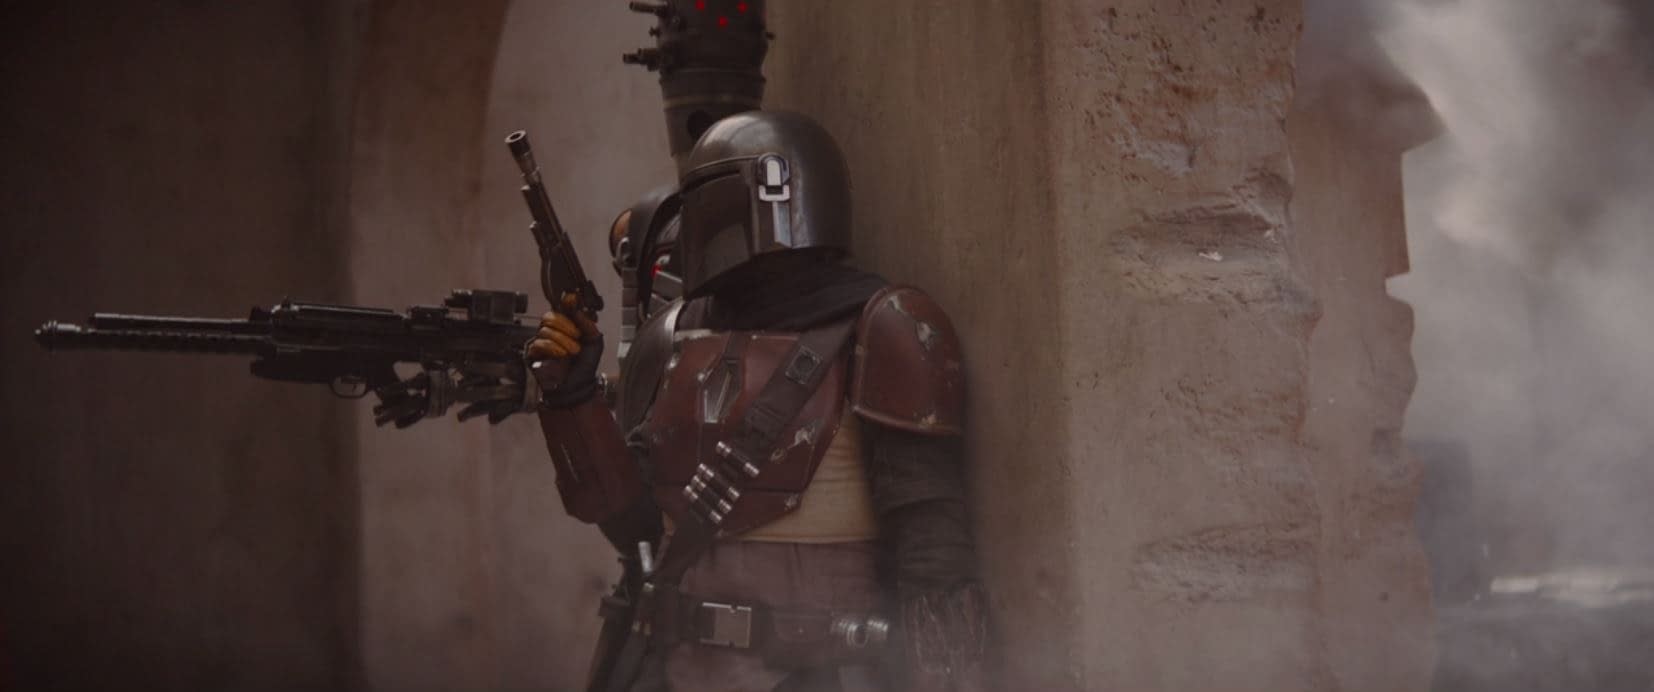 "The Mandalorian" S01 Ep01: Star Wars Rocks in a Whole New Way (Spoiler Review)